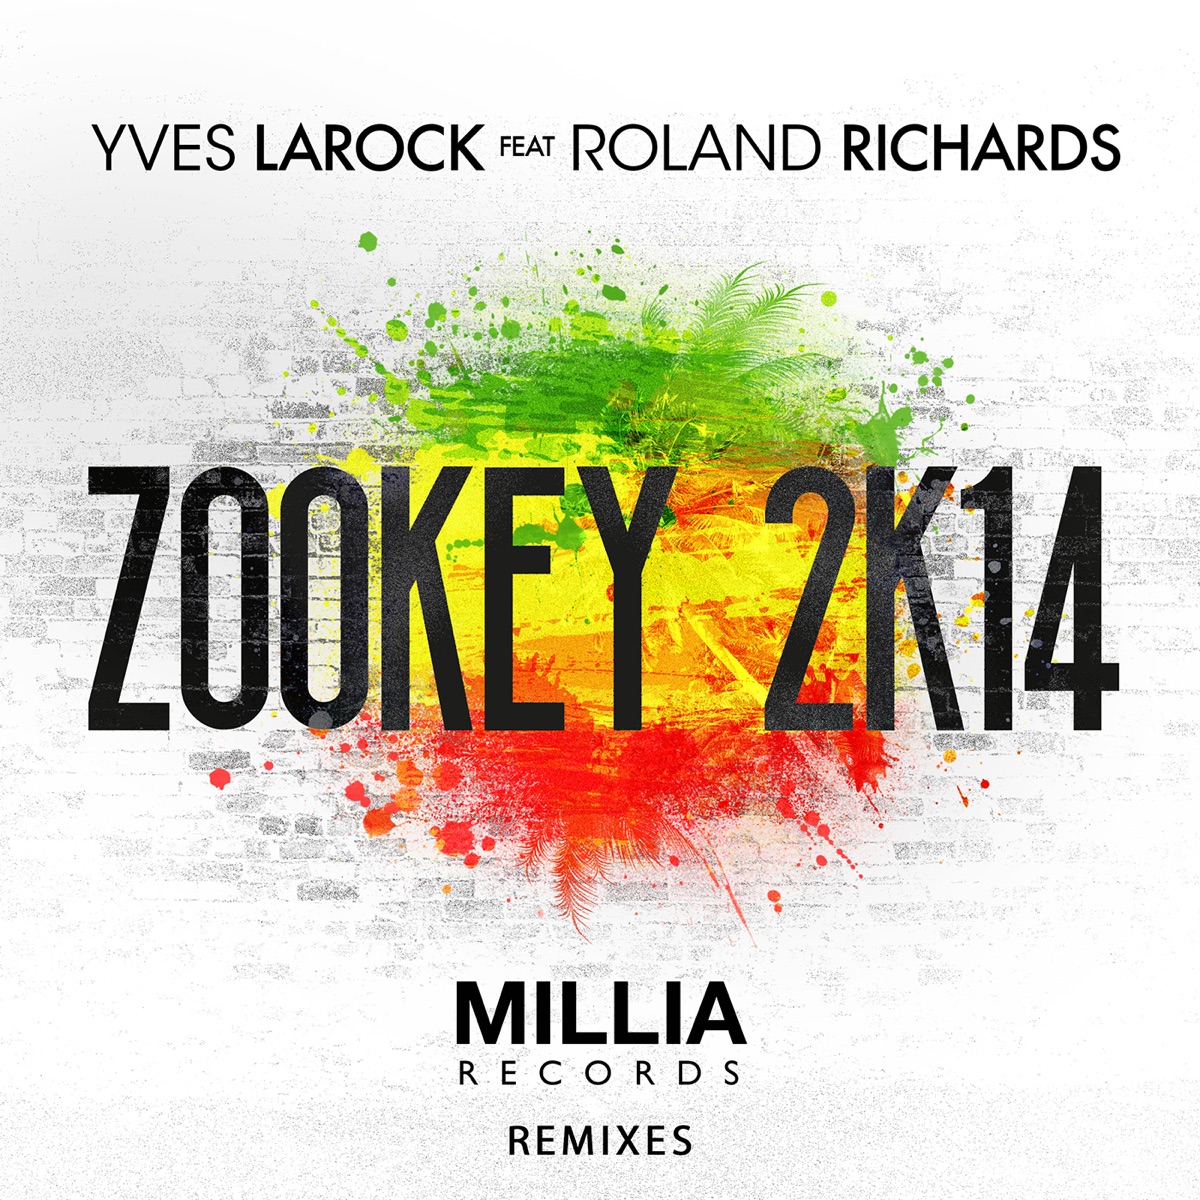 Zookey (Lift Your Leg Up) - Album by Yves Larock featuring Roland Richards  - Apple Music